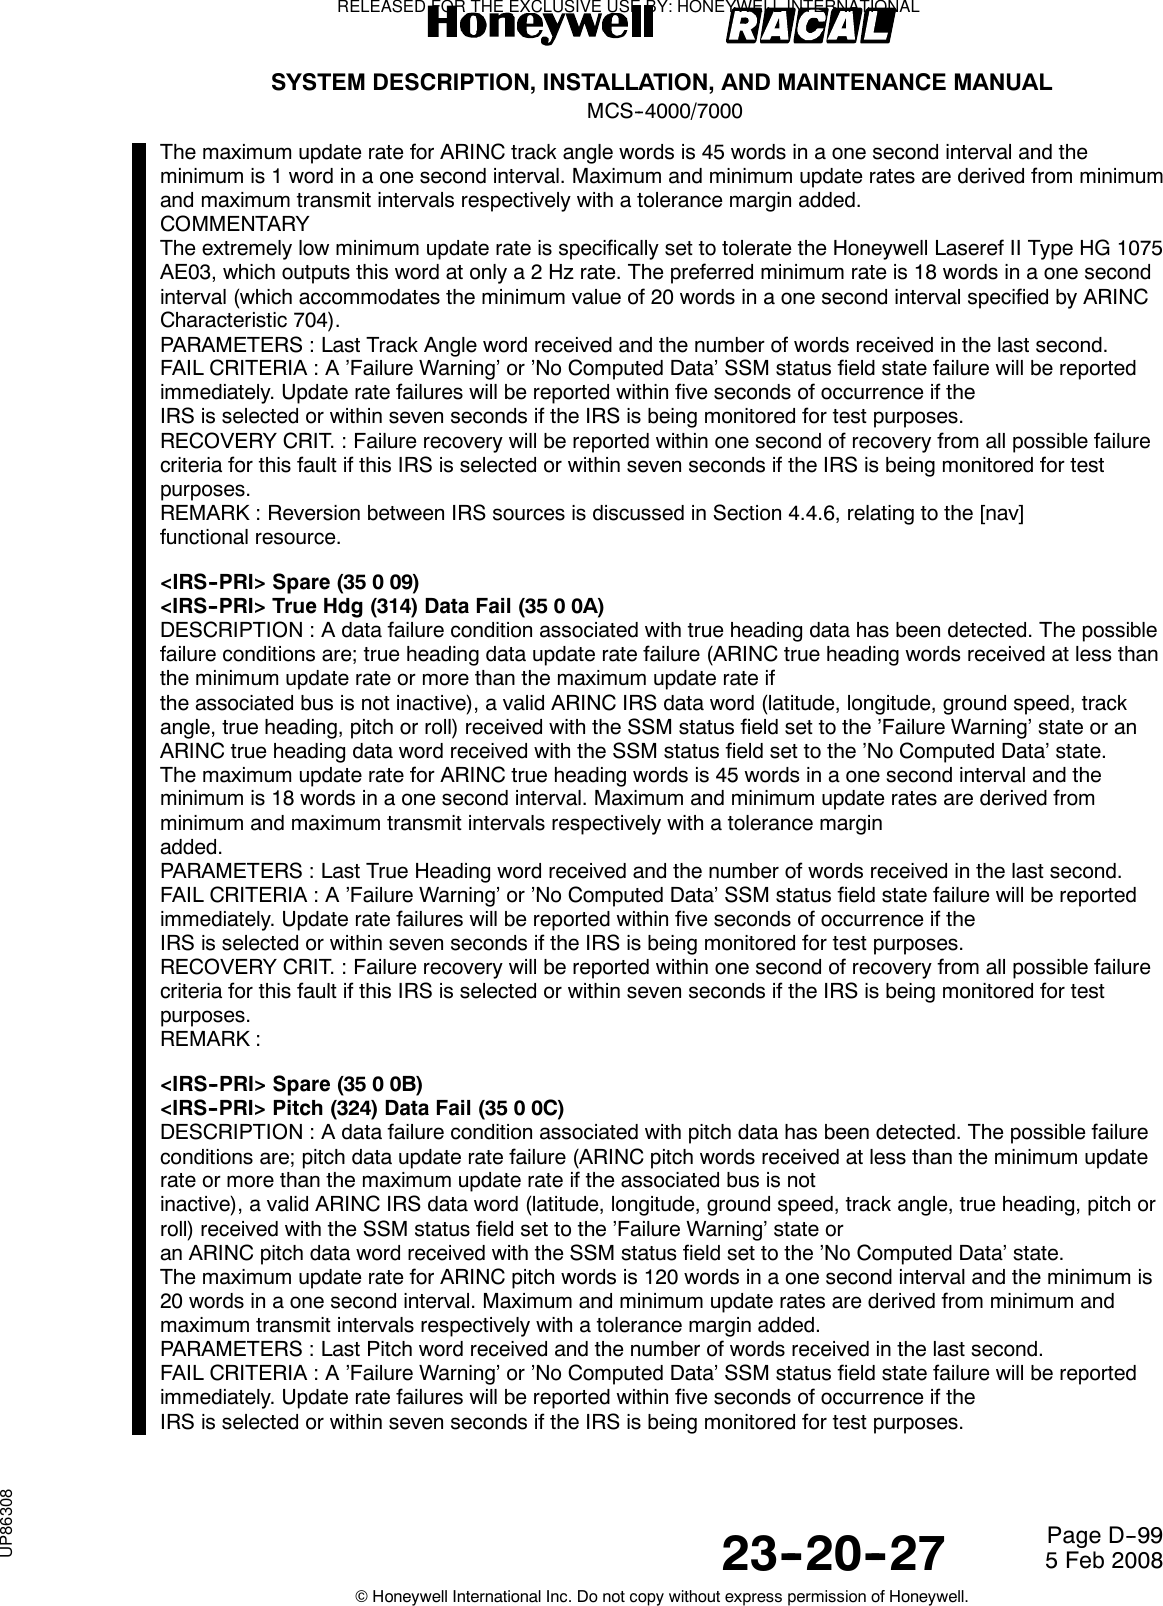 SYSTEM DESCRIPTION, INSTALLATION, AND MAINTENANCE MANUALMCS--4000/700023--20--27 5 Feb 2008©Honeywell International Inc. Do not copy without express permission of Honeywell.Page D--99The maximum update rate for ARINC track angle words is 45 words in a one second interval and theminimum is 1 word in a one second interval. Maximum and minimum update rates are derived from minimumand maximum transmit intervals respectively with a tolerance margin added.COMMENTARYThe extremely low minimum update rate is specifically set to tolerate the Honeywell Laseref II Type HG 1075AE03, which outputs this word at only a 2 Hz rate. The preferred minimum rate is 18 words in a one secondinterval (which accommodates the minimum value of 20 words in a one second interval specified by ARINCCharacteristic 704).PARAMETERS : Last Track Angle word received and the number of words received in the last second.FAIL CRITERIA : A ’Failure Warning’ or ’No Computed Data’ SSM status field state failure will be reportedimmediately. Update rate failures will be reported within five seconds of occurrence if theIRS is selected or within seven seconds if the IRS is being monitored for test purposes.RECOVERY CRIT. : Failure recovery will be reported within one second of recovery from all possible failurecriteria for this fault if this IRS is selected or within seven seconds if the IRS is being monitored for testpurposes.REMARK : Reversion between IRS sources is discussed in Section 4.4.6, relating to the [nav]functional resource.&lt;IRS--PRI&gt; Spare (35 0 09)&lt;IRS--PRI&gt; True Hdg (314) Data Fail (35 0 0A)DESCRIPTION : A data failure condition associated with true heading data has been detected. The possiblefailure conditions are; true heading data update rate failure (ARINC true heading words received at less thanthe minimum update rate or more than the maximum update rate ifthe associated bus is not inactive), a valid ARINC IRS data word (latitude, longitude, ground speed, trackangle, true heading, pitch or roll) received with the SSM status field set to the ’Failure Warning’ state or anARINC true heading data word received with the SSM status field set to the ’No Computed Data’ state.The maximum update rate for ARINC true heading words is 45 words in a one second interval and theminimum is 18 words in a one second interval. Maximum and minimum update rates are derived fromminimum and maximum transmit intervals respectively with a tolerance marginadded.PARAMETERS : Last True Heading word received and the number of words received in the last second.FAIL CRITERIA : A ’Failure Warning’ or ’No Computed Data’ SSM status field state failure will be reportedimmediately. Update rate failures will be reported within five seconds of occurrence if theIRS is selected or within seven seconds if the IRS is being monitored for test purposes.RECOVERY CRIT. : Failure recovery will be reported within one second of recovery from all possible failurecriteria for this fault if this IRS is selected or within seven seconds if the IRS is being monitored for testpurposes.REMARK :&lt;IRS--PRI&gt;Spare(3500B)&lt;IRS--PRI&gt; Pitch (324) Data Fail (35 0 0C)DESCRIPTION : A data failure condition associated with pitch data has been detected. The possible failureconditions are; pitch data update rate failure (ARINC pitch words received at less than the minimum updaterate or more than the maximum update rate if the associated bus is notinactive), a valid ARINC IRS data word (latitude, longitude, ground speed, track angle, true heading, pitch orroll) received with the SSM status field set to the ’Failure Warning’ state oran ARINC pitch data word received with the SSM status field set to the ’No Computed Data’ state.The maximum update rate for ARINC pitch words is 120 words in a one second interval and the minimum is20 words in a one second interval. Maximum and minimum update rates are derived from minimum andmaximum transmit intervals respectively with a tolerance margin added.PARAMETERS : Last Pitch word received and the number of words received in the last second.FAIL CRITERIA : A ’Failure Warning’ or ’No Computed Data’ SSM status field state failure will be reportedimmediately. Update rate failures will be reported within five seconds of occurrence if theIRS is selected or within seven seconds if the IRS is being monitored for test purposes.RELEASED FOR THE EXCLUSIVE USE BY: HONEYWELL INTERNATIONALUP86308